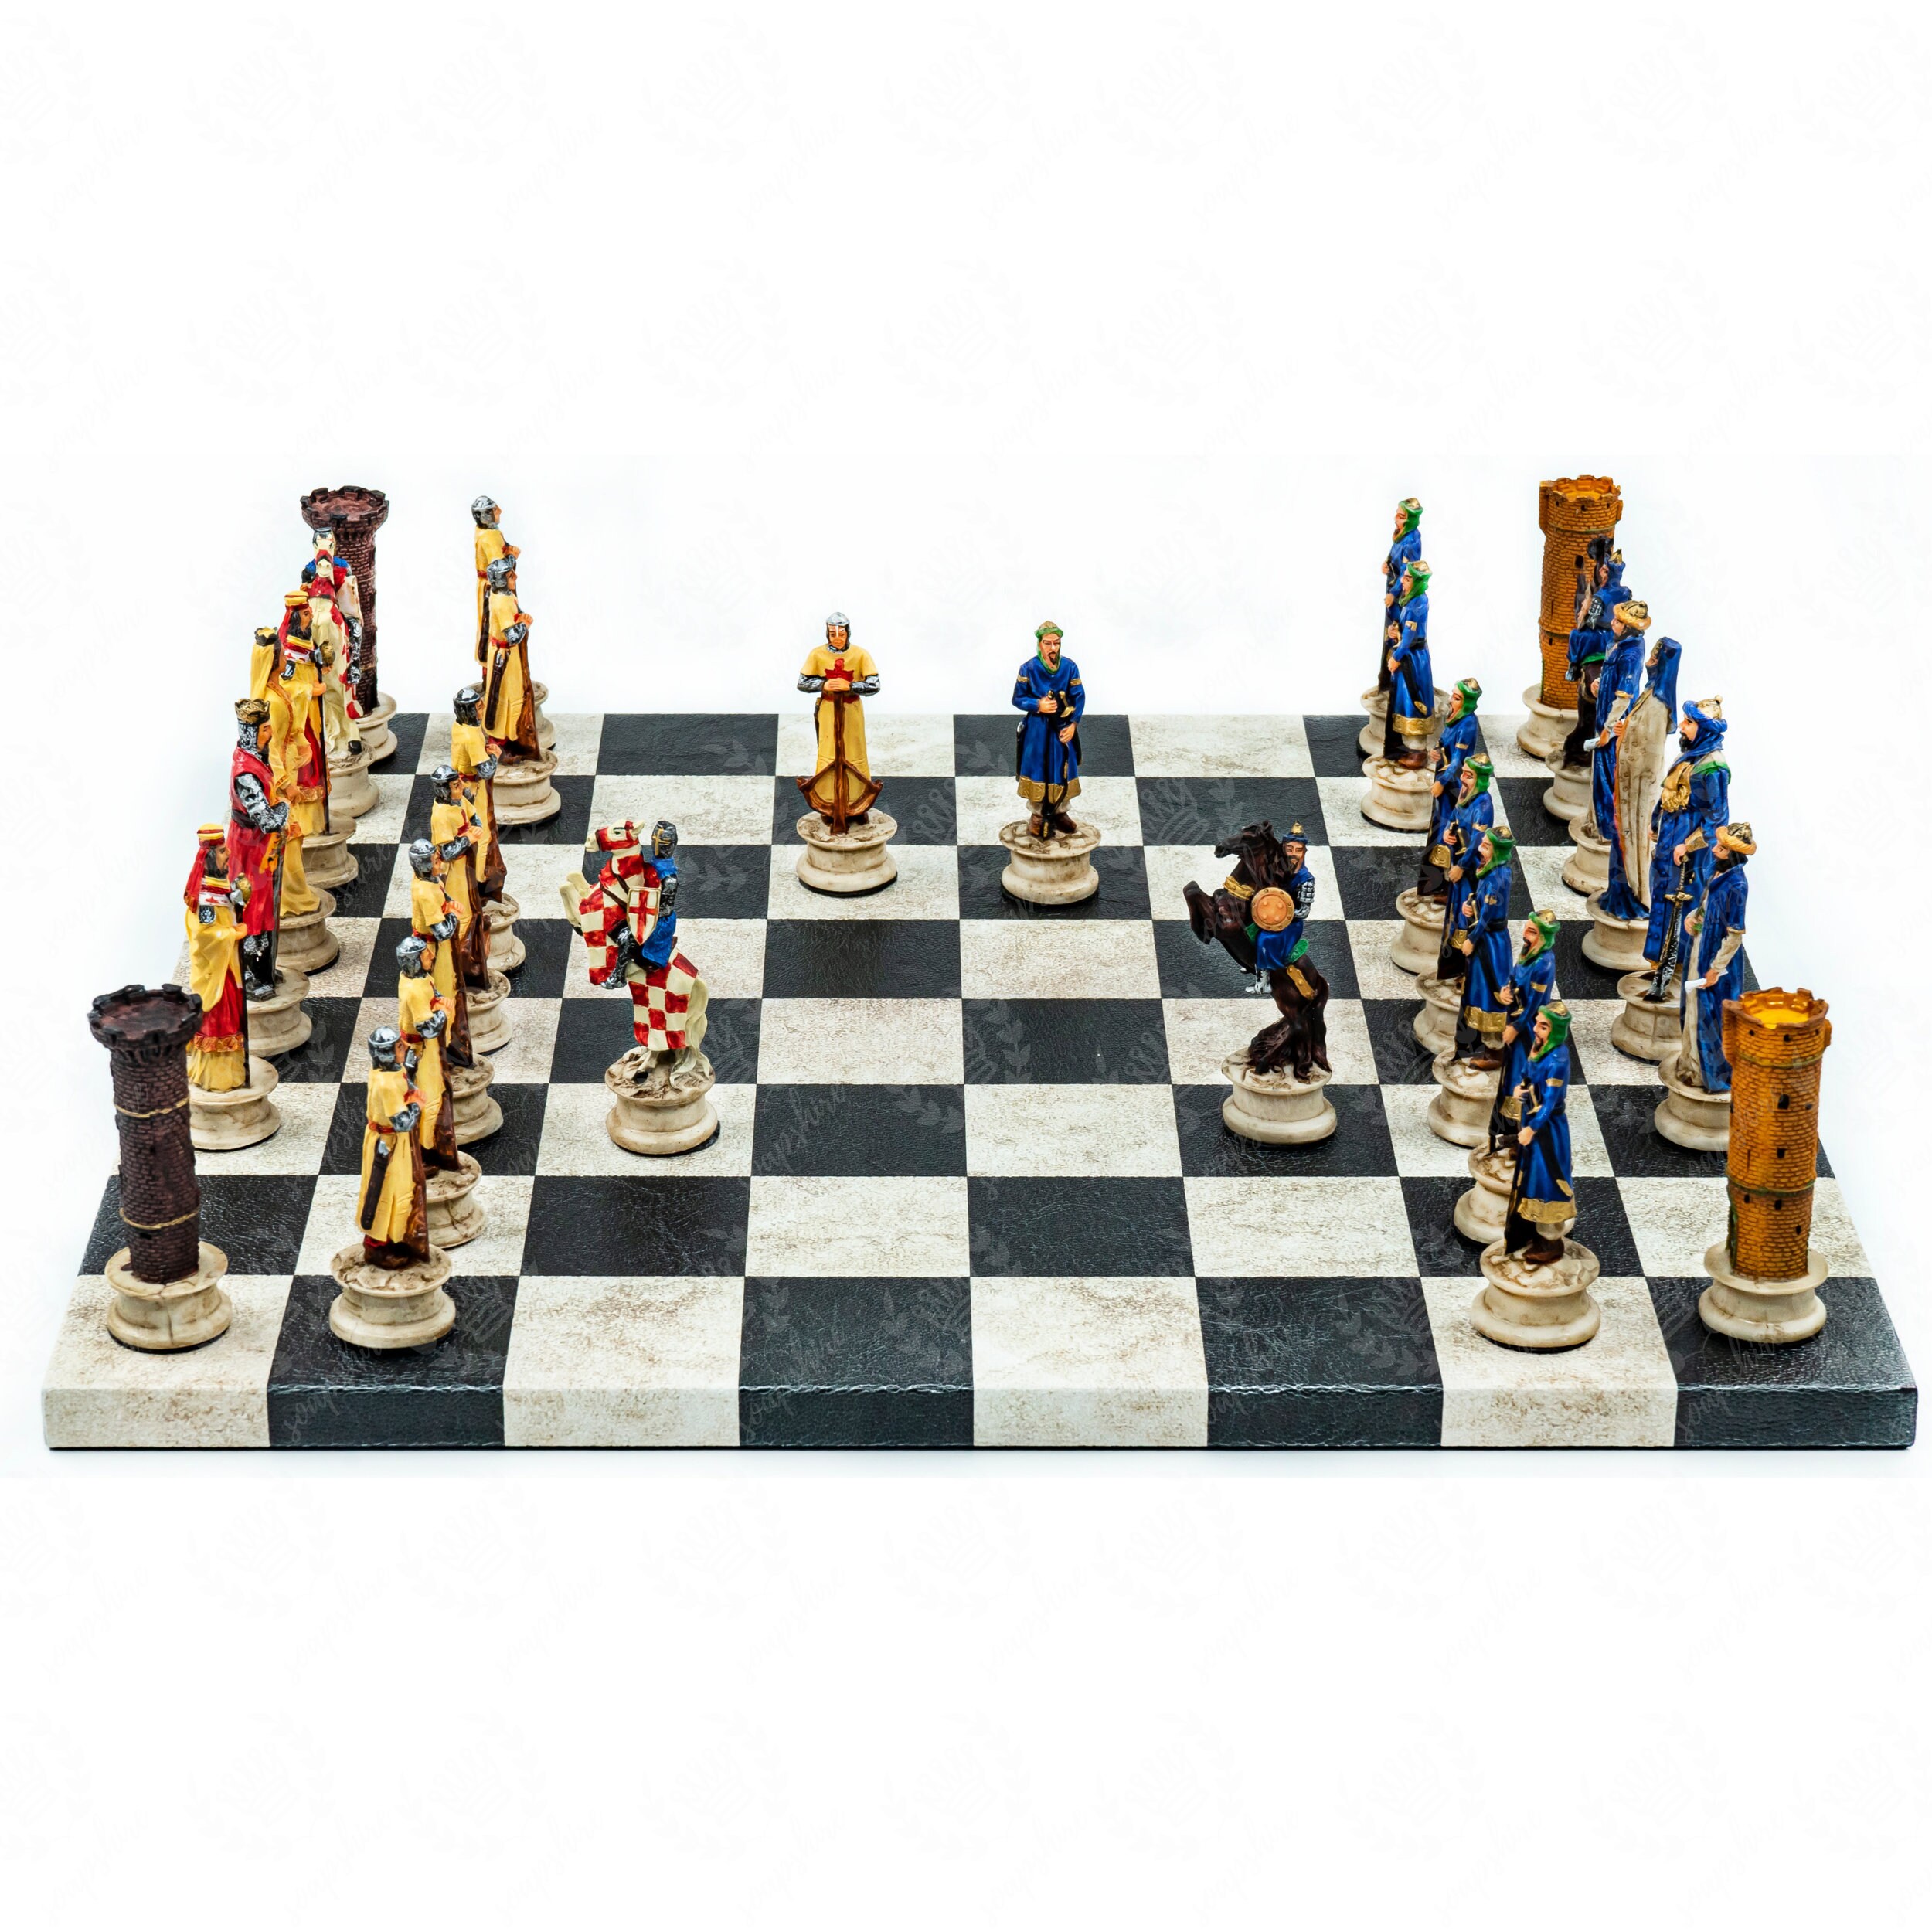 Crusaders Chess Set with board 36cm 14 Handpainted